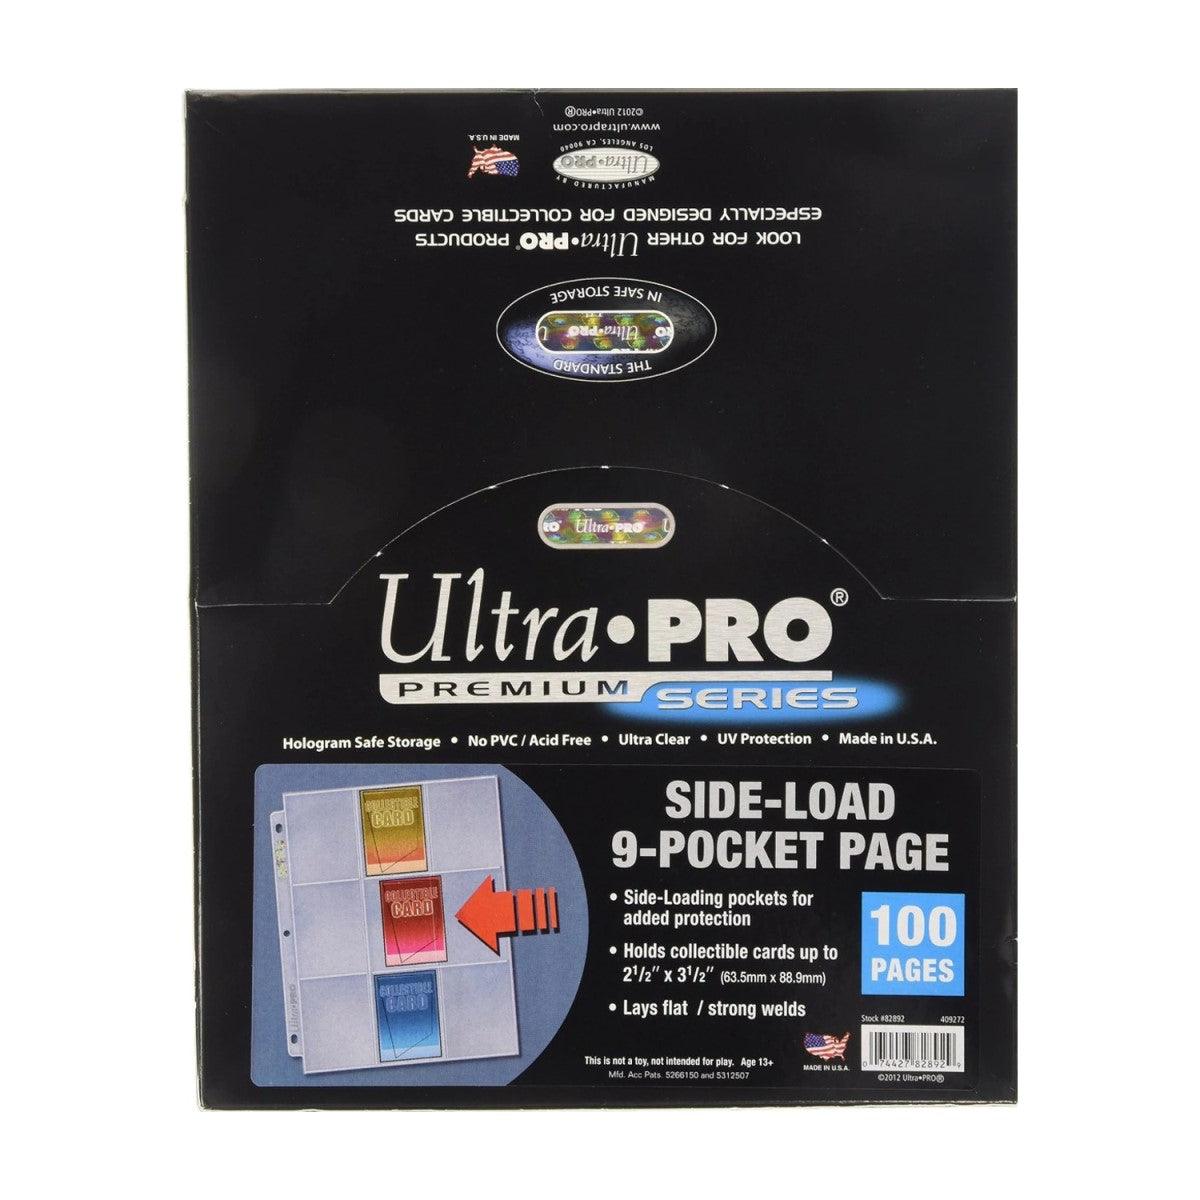 Ultra PRO - 9 Pocket Side-Load Pages Box (100ct) for Standard Size Cards - Platinum Series - Hobby Champion Inc